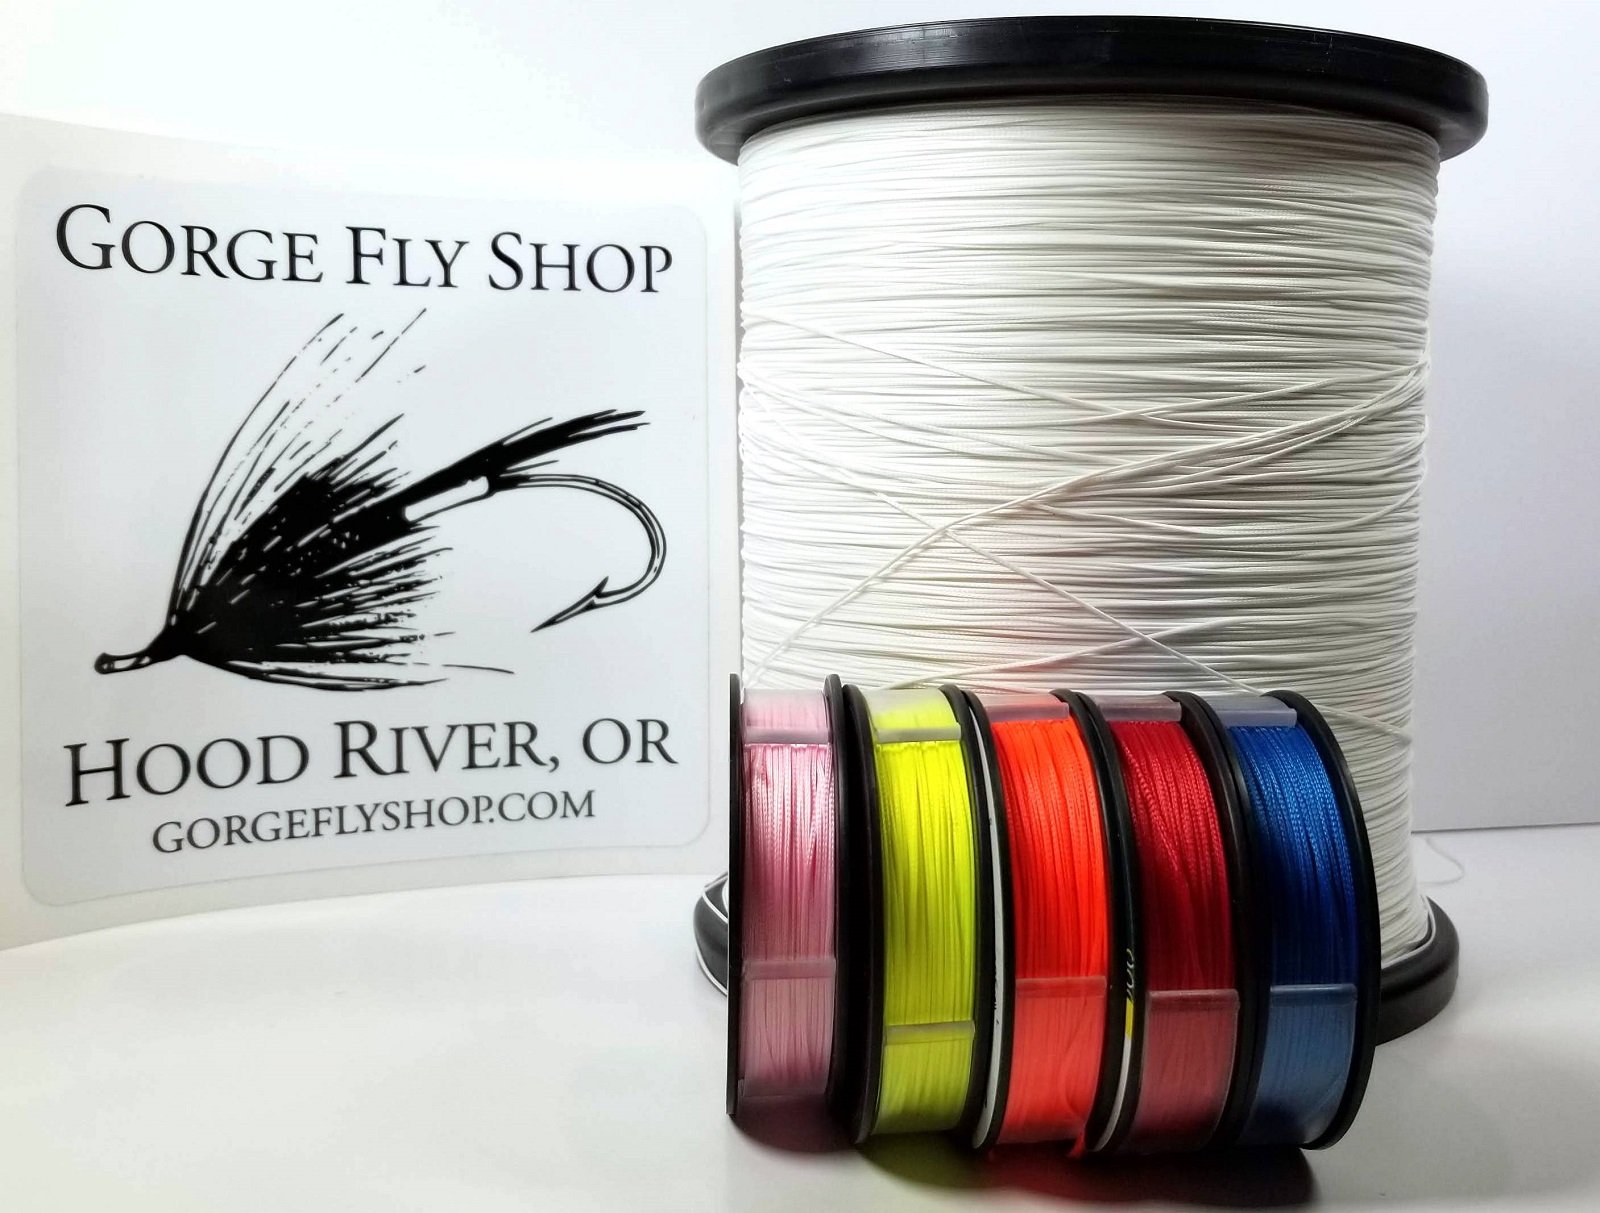 WHITE Orvis DACRON Fly Line Backing 50 to 2500 Yd Spools 20 lb Test 